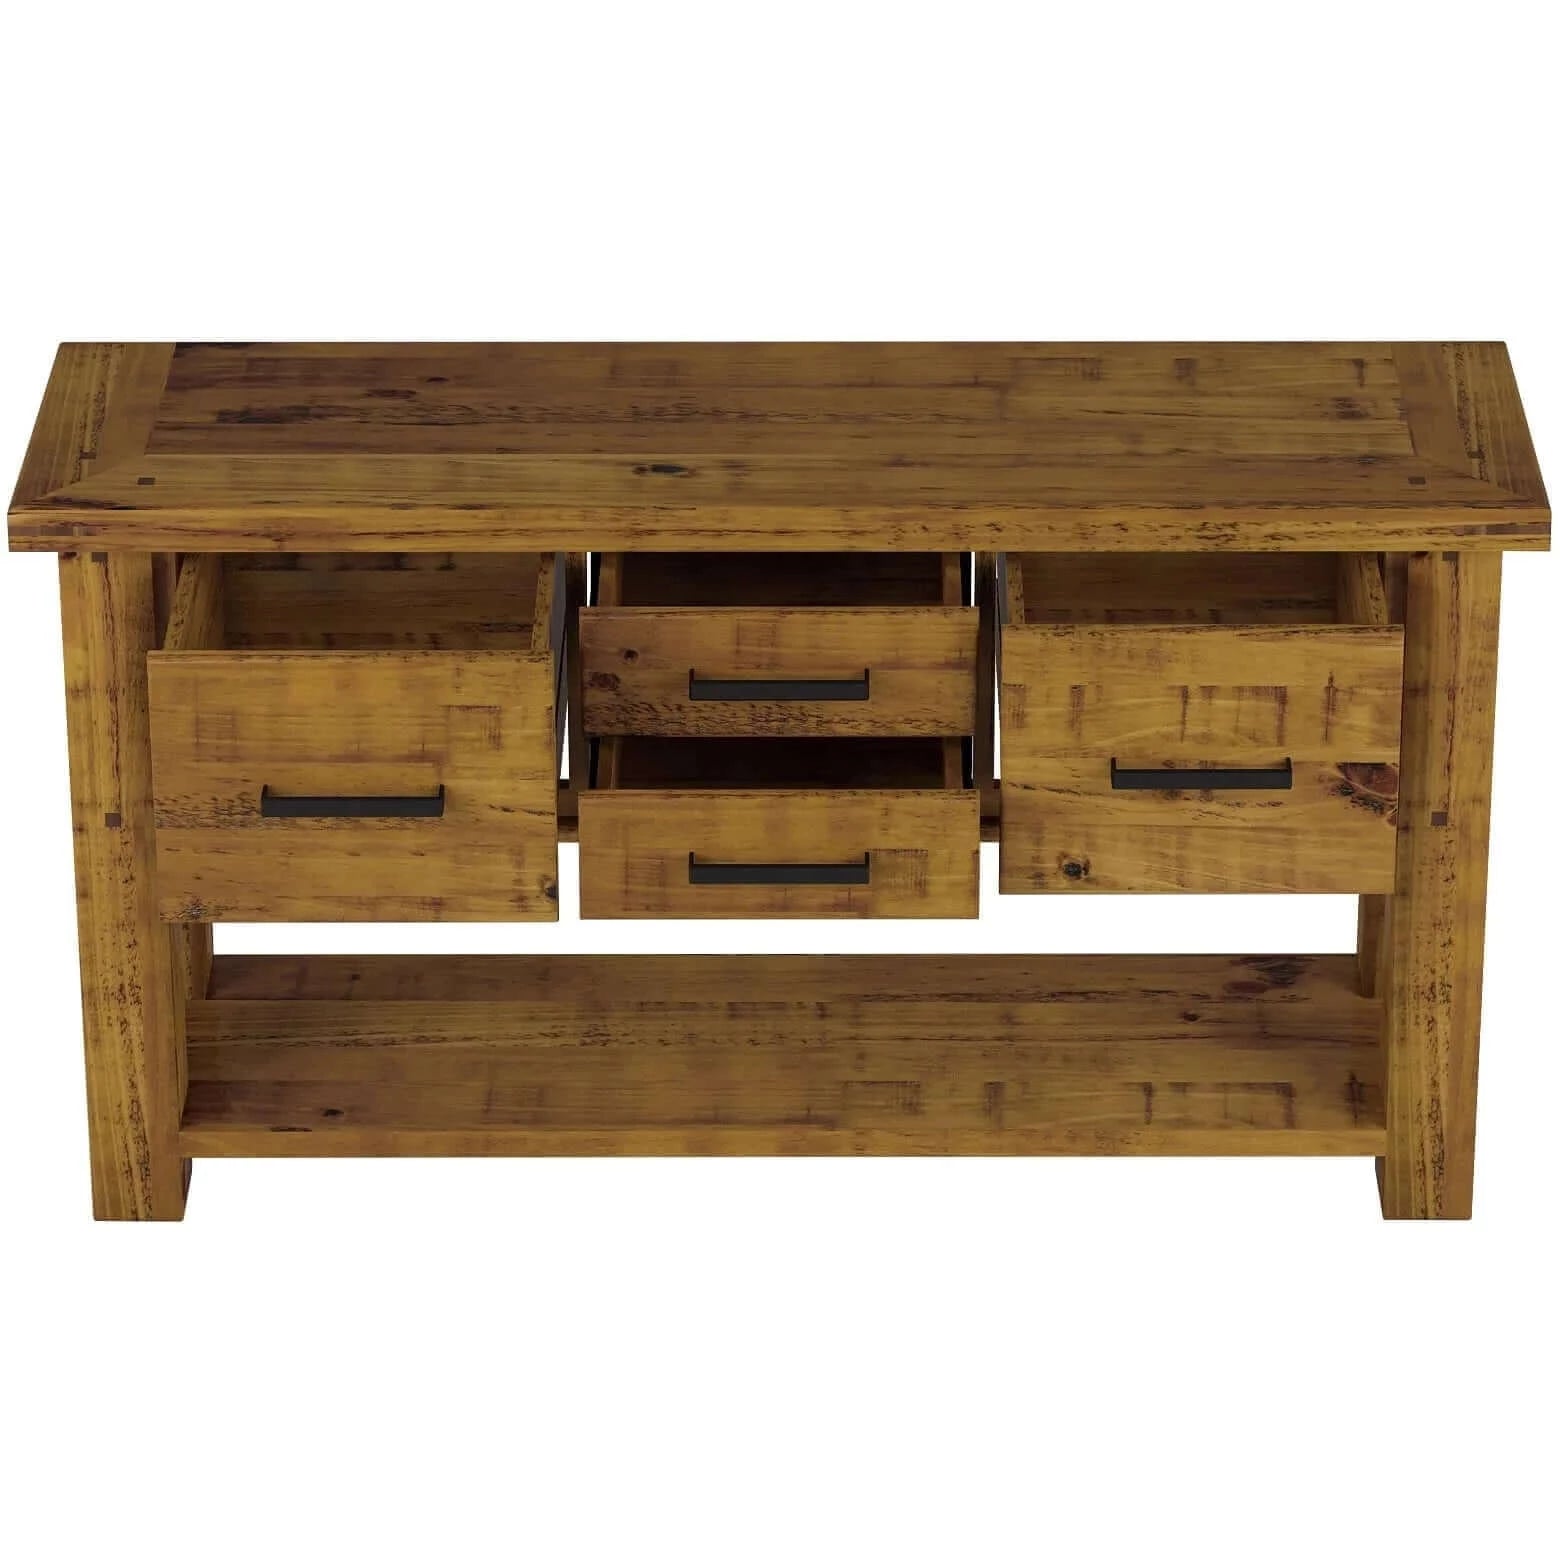 Buy teasel console hallway entry table 147cm solid pine timber wood - rustic oak - upinteriors-Upinteriors